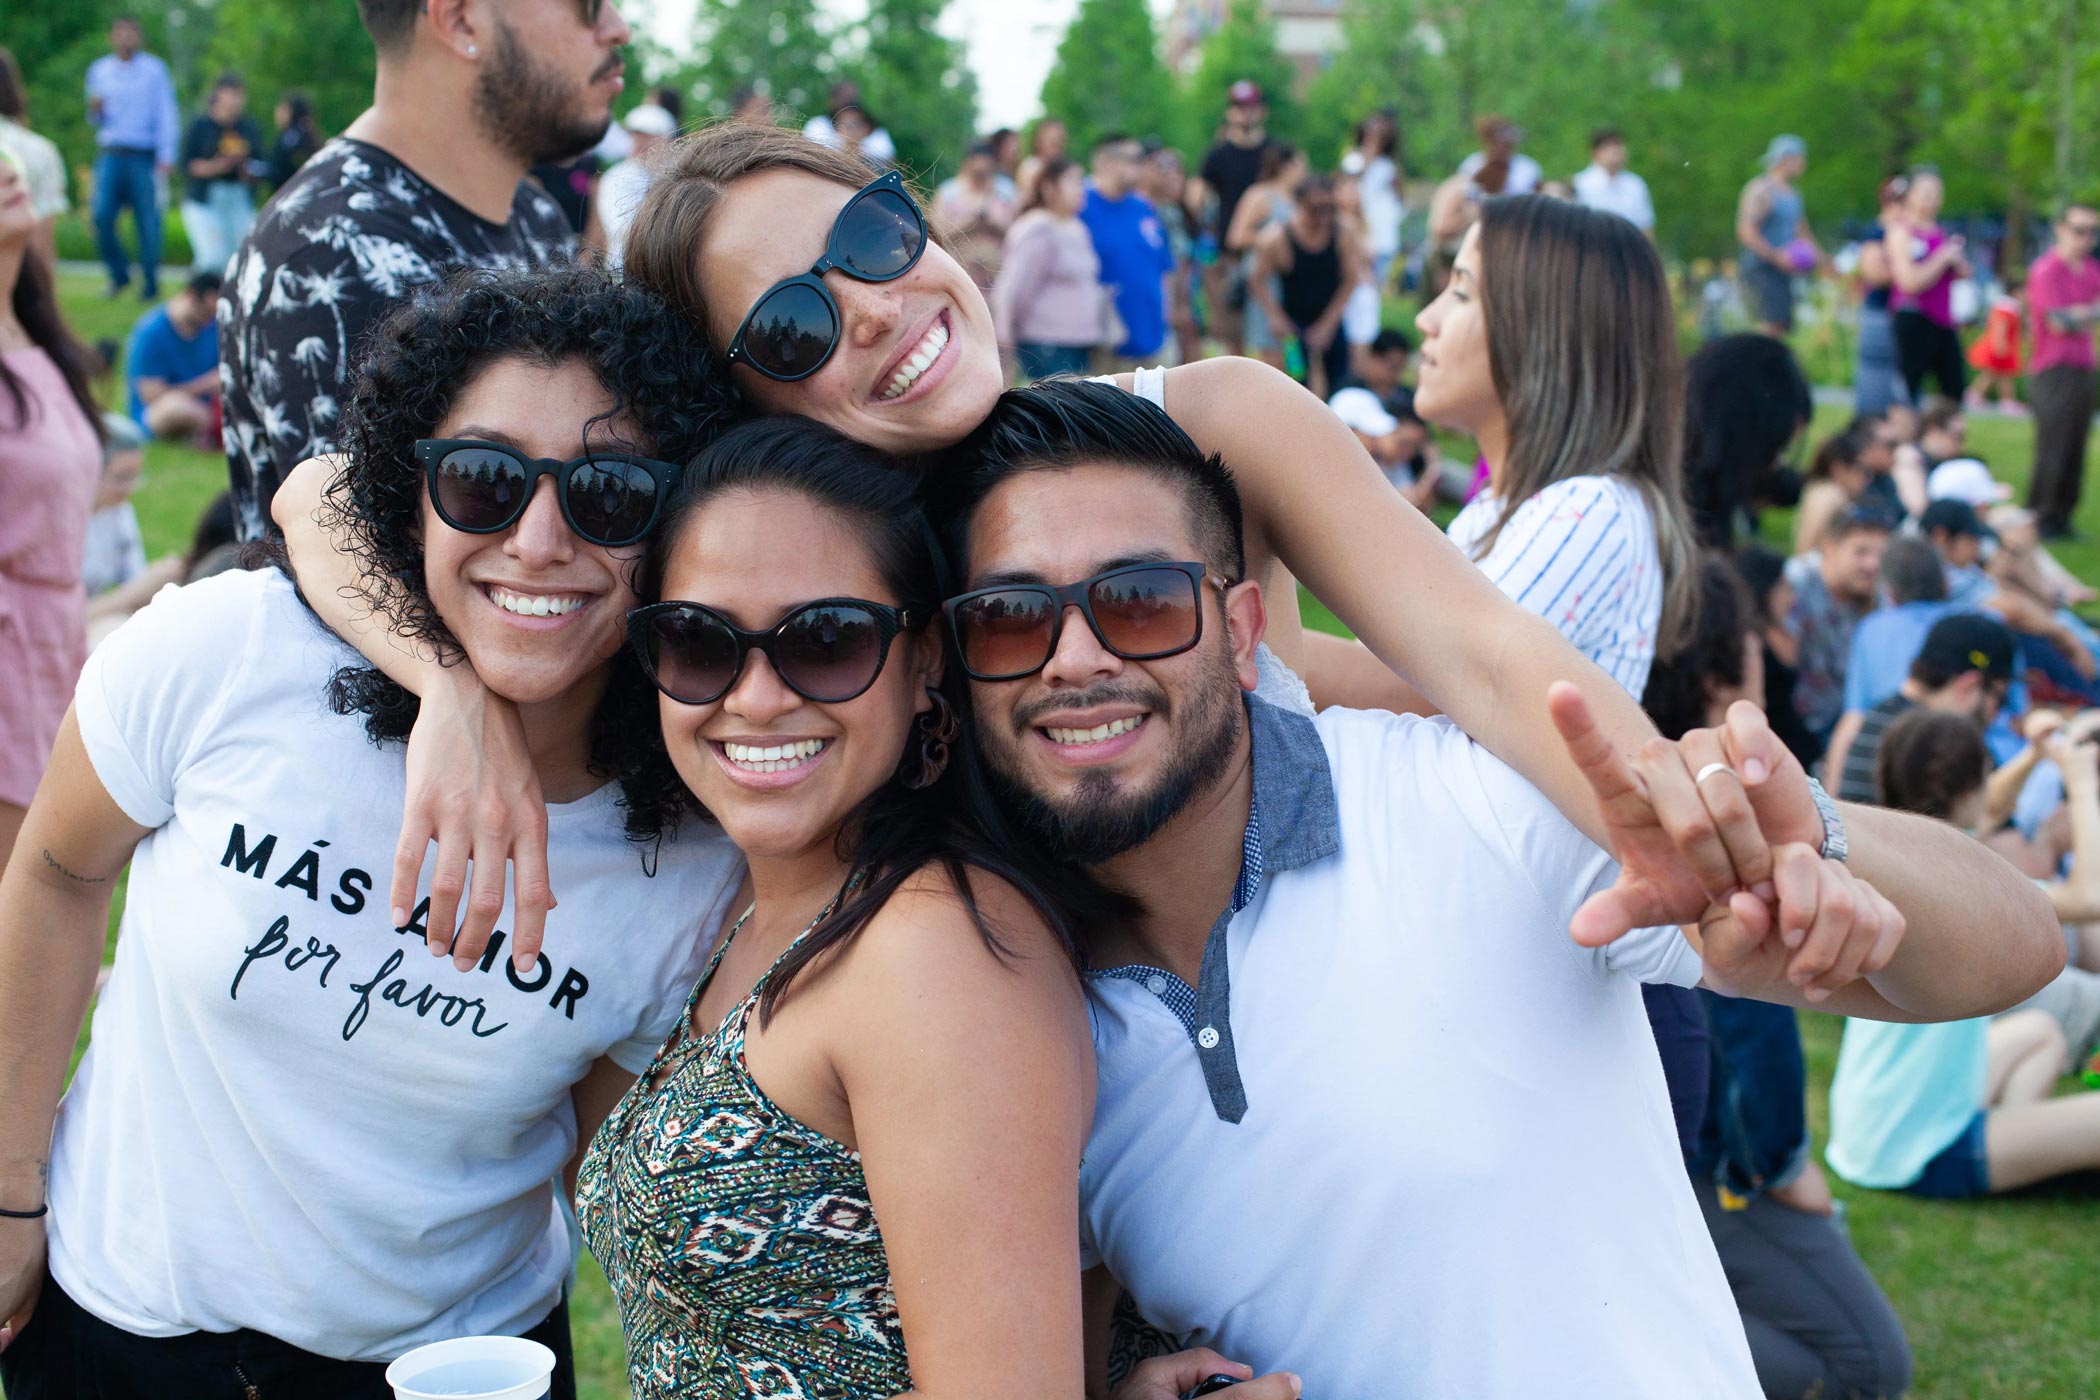 Friends Smiling at Mexicofest at Navy Pier